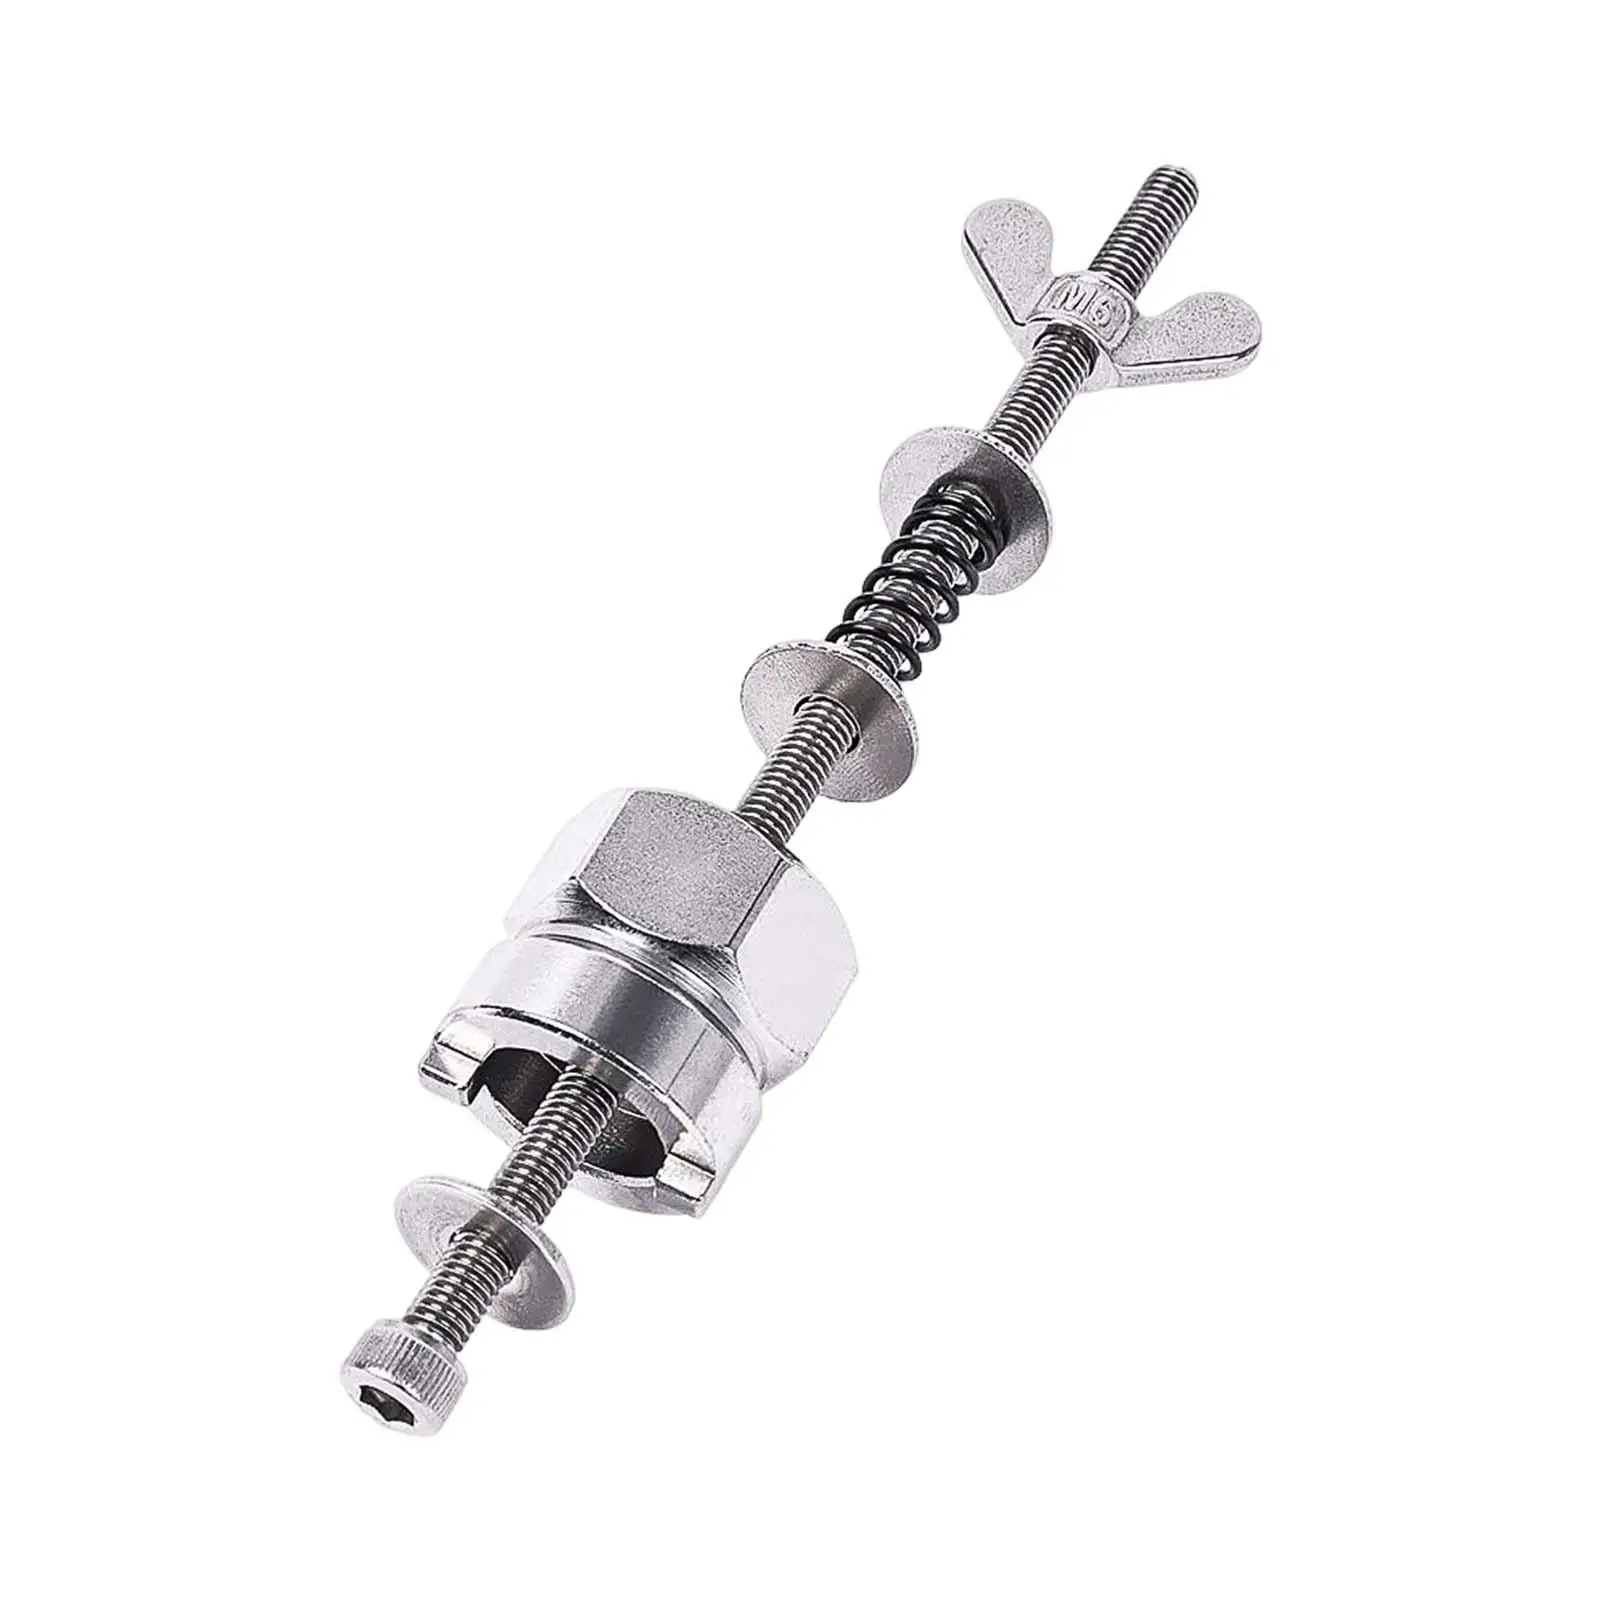 Bike Freehub Body Removal Tool Bicycle Freehub Disassembly Tool Durable